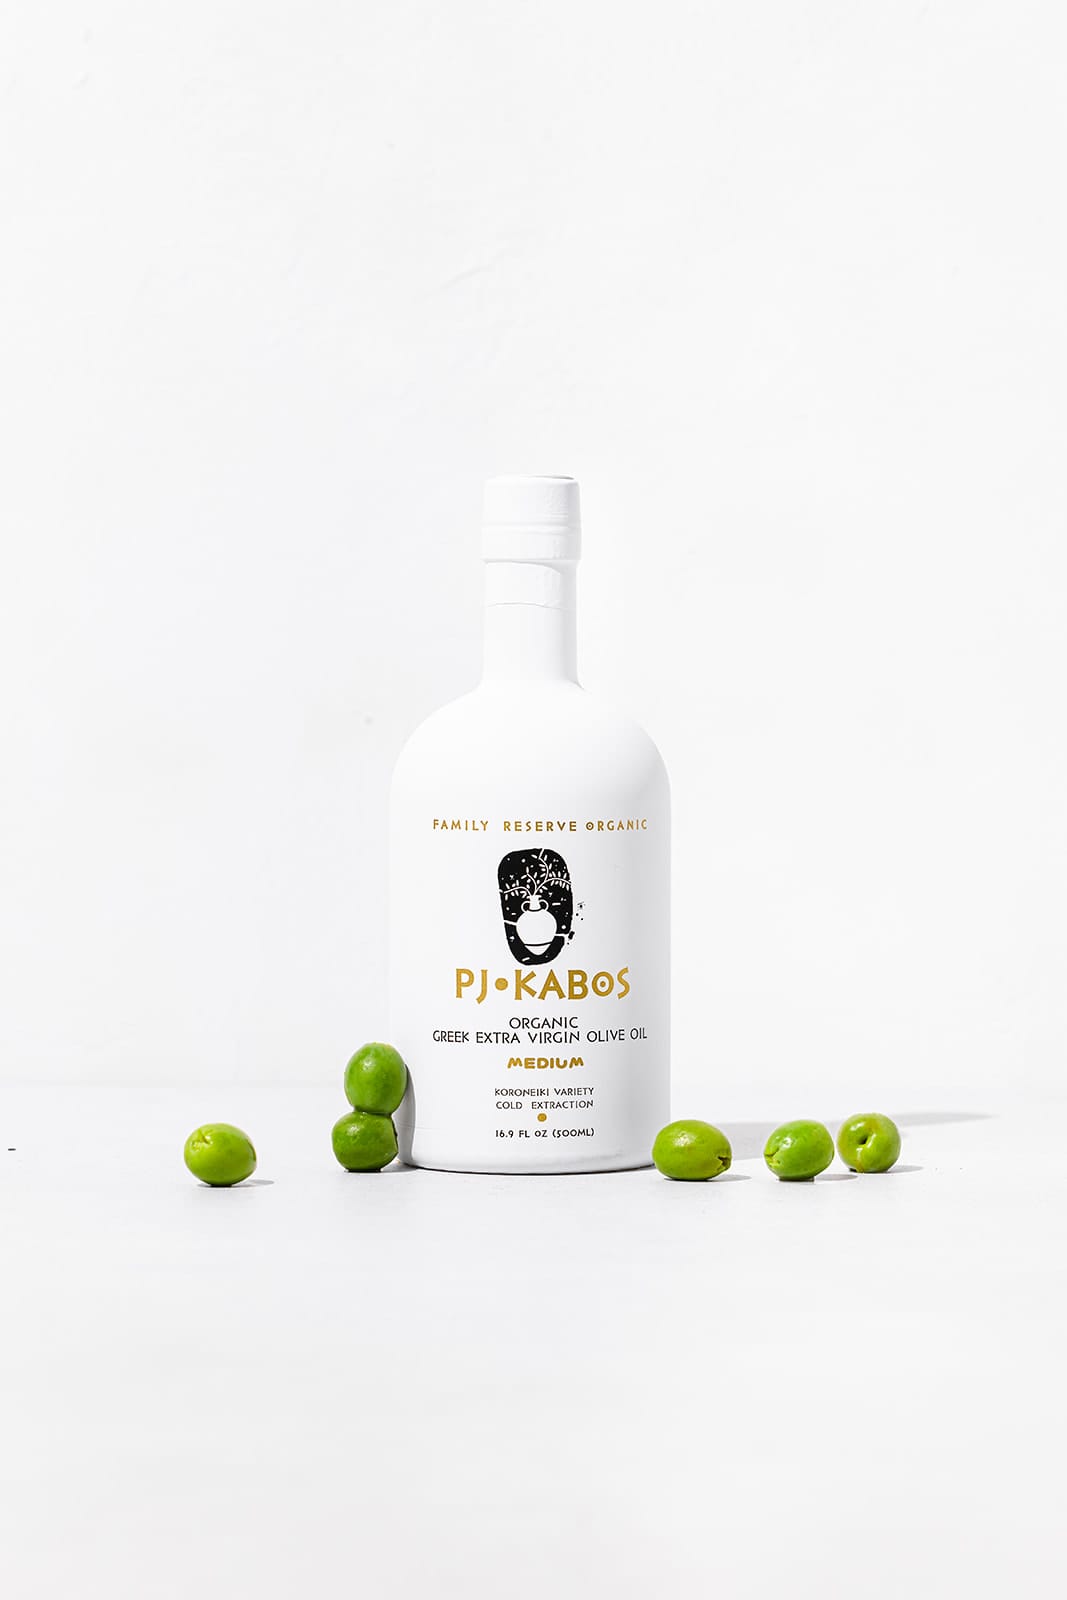 An elegant bottle of PJ Kabos High Phenolic Extra Virgin Olive oil with olives scattered around it.